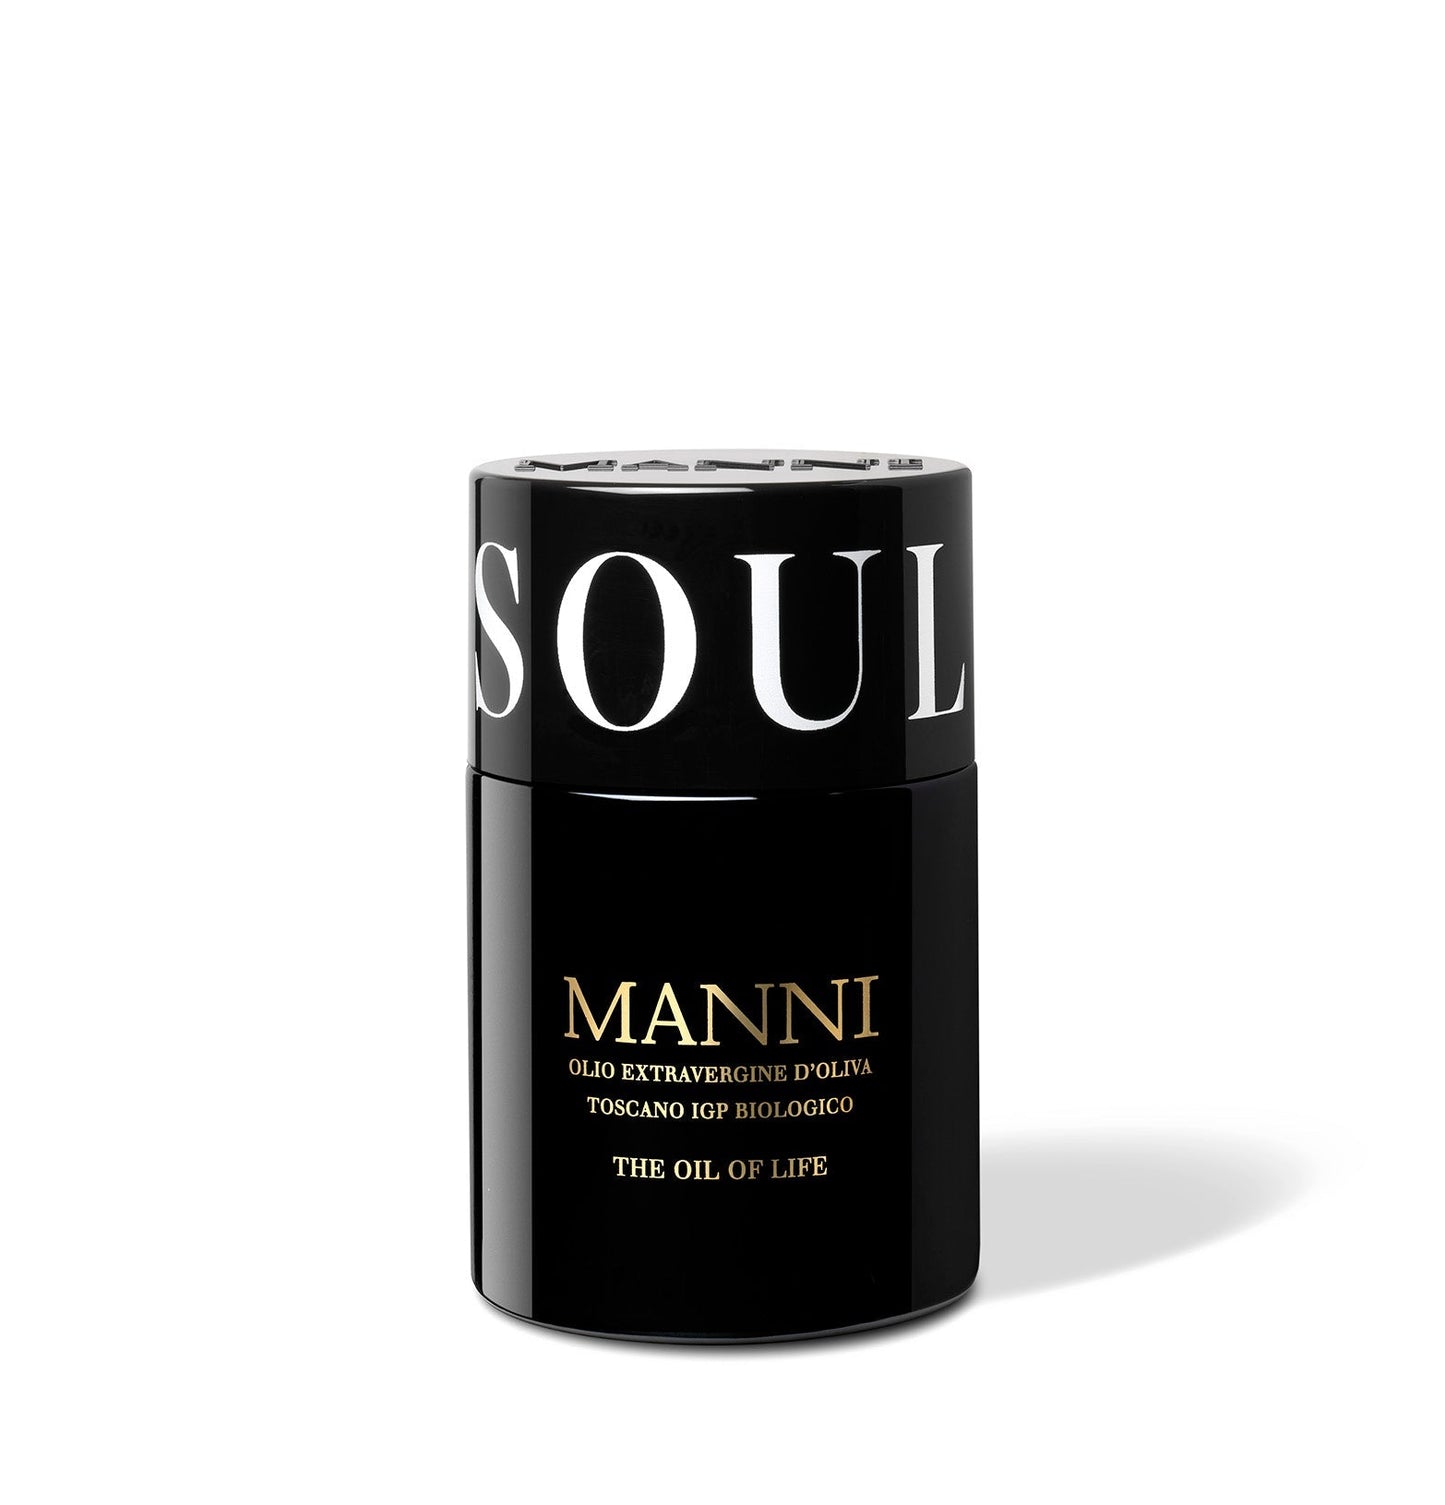 Manni Oil of life organic extra virgin olive oil - soul